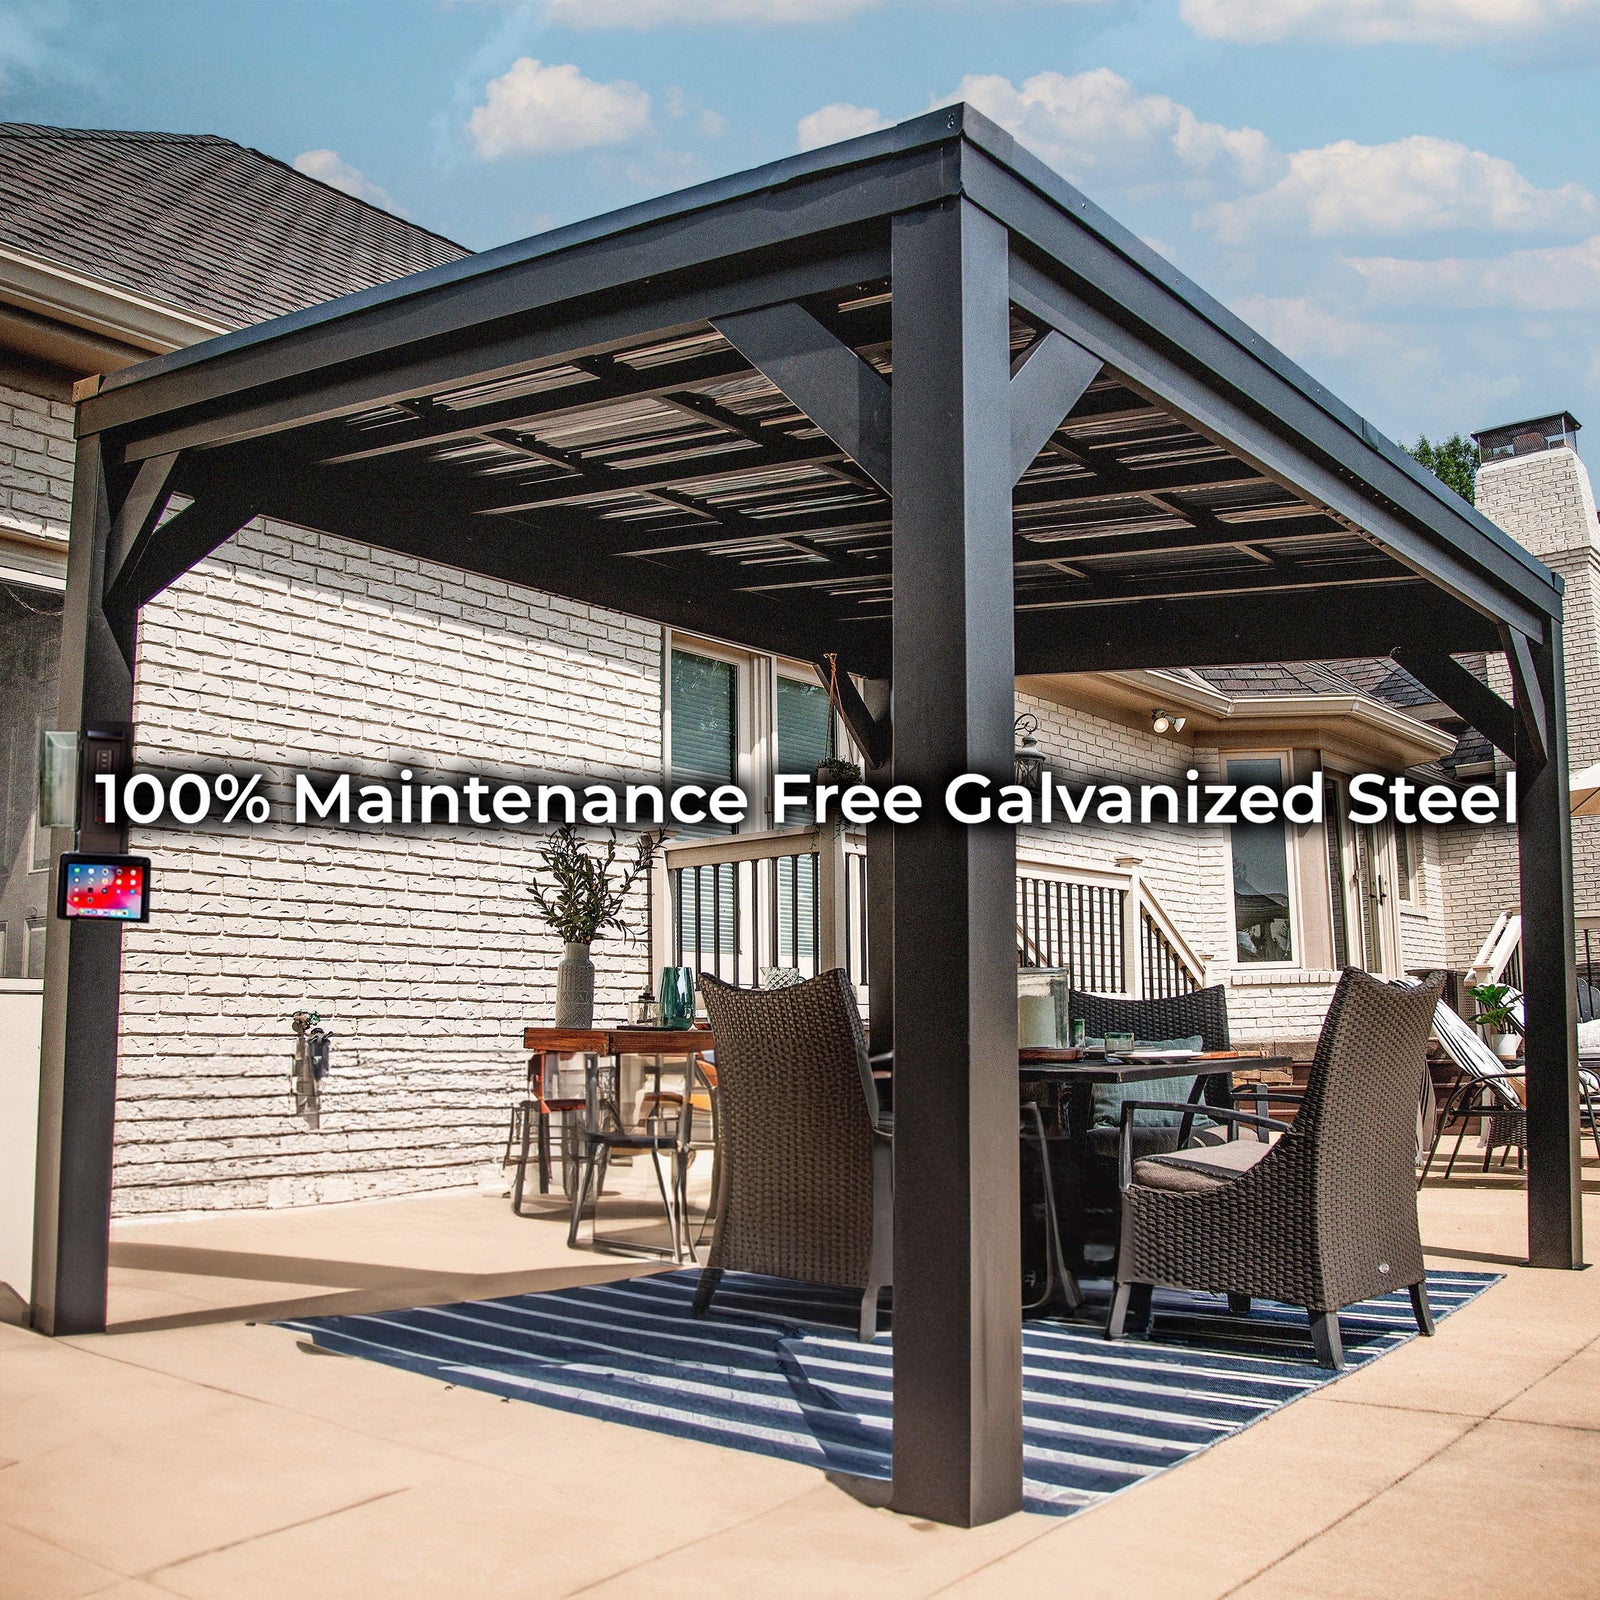 Load image into Gallery viewer, 100% maintenance free galvanized steel
